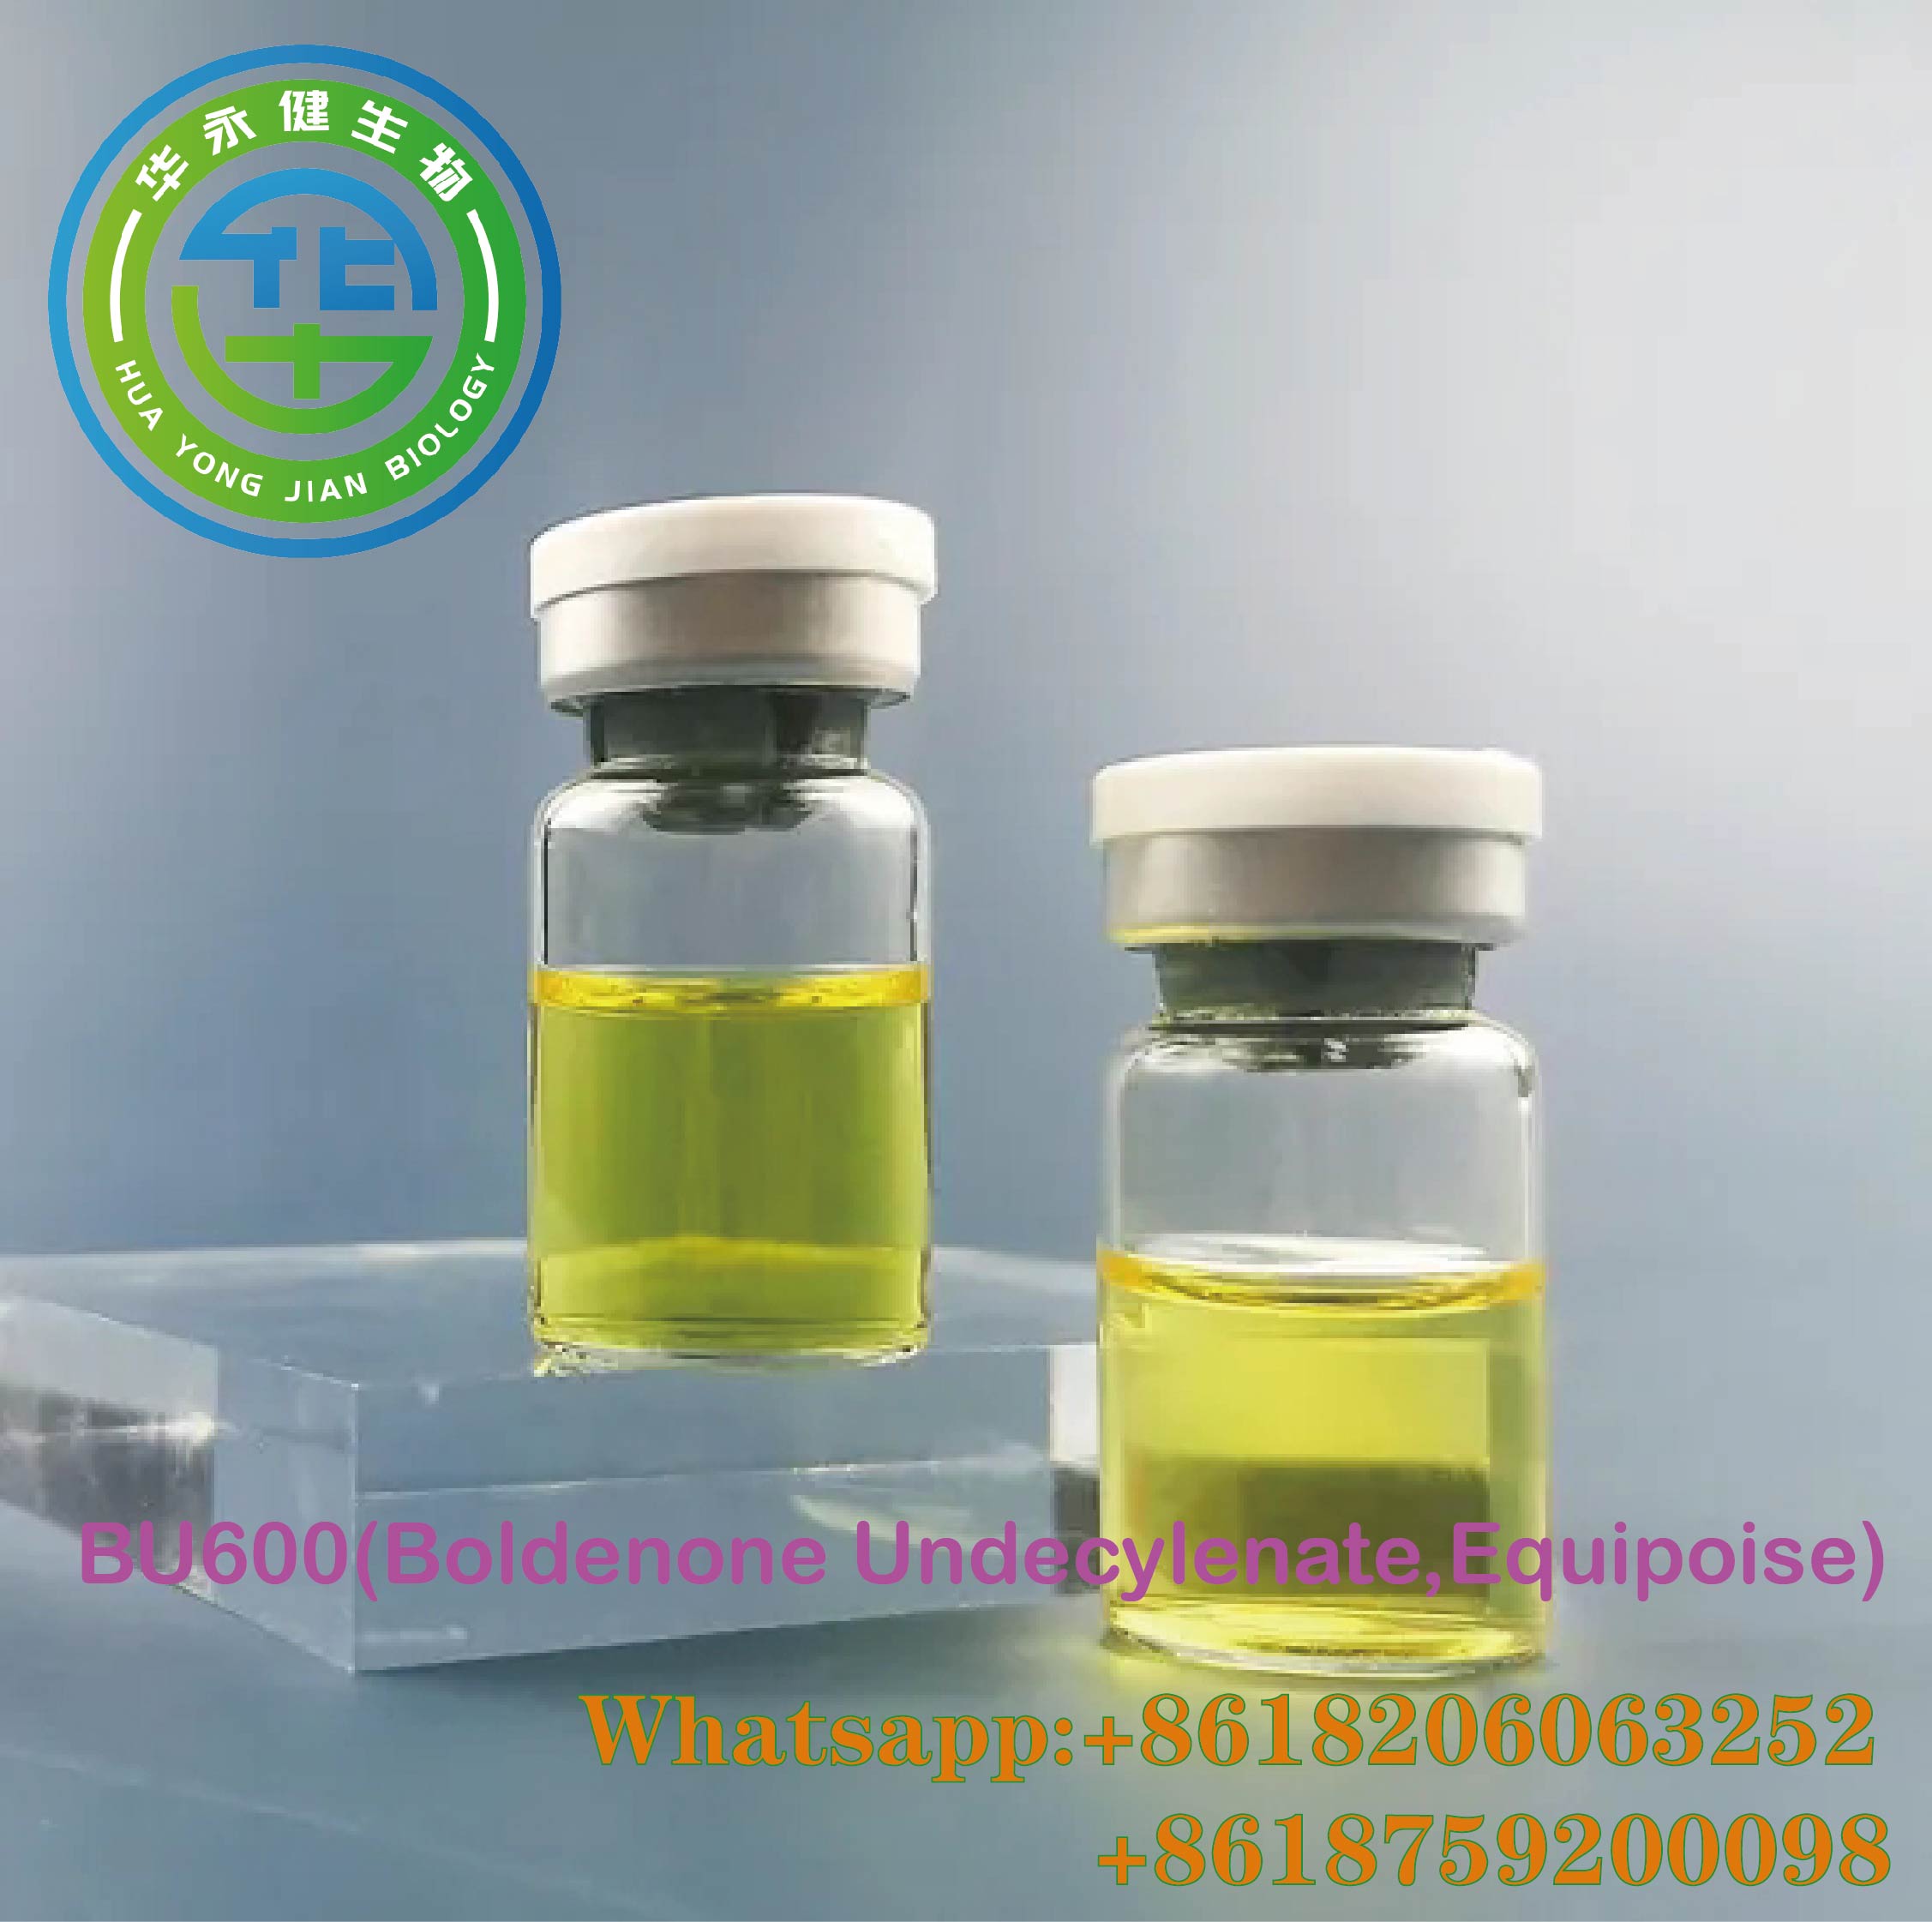 Injectable Oil Liquid Boldenone Undecylenate 600mg/ml for Body Building Bu Equipoise 600 Featured Image